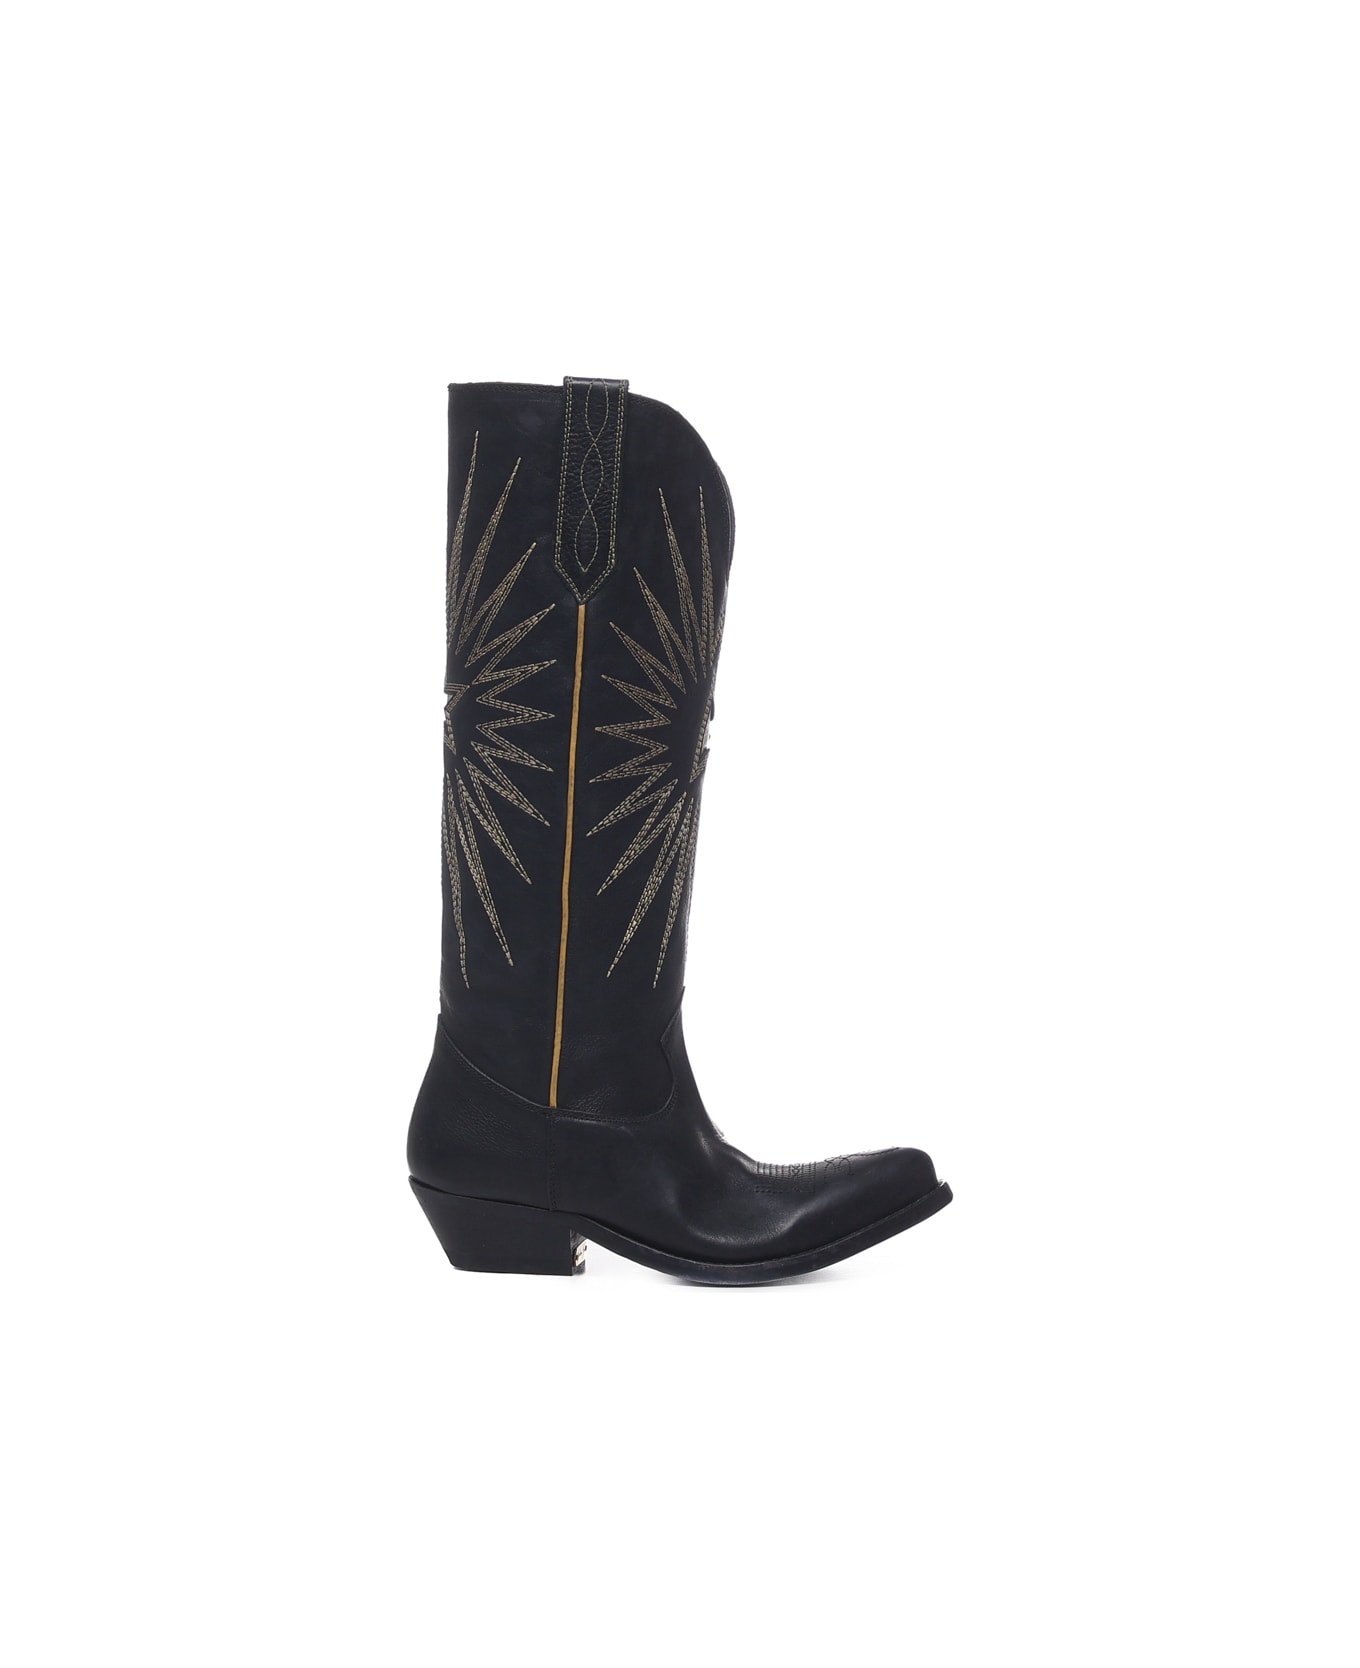 Golden Goose Wish Star Boots In Black Leather With Inlaid Star - Black